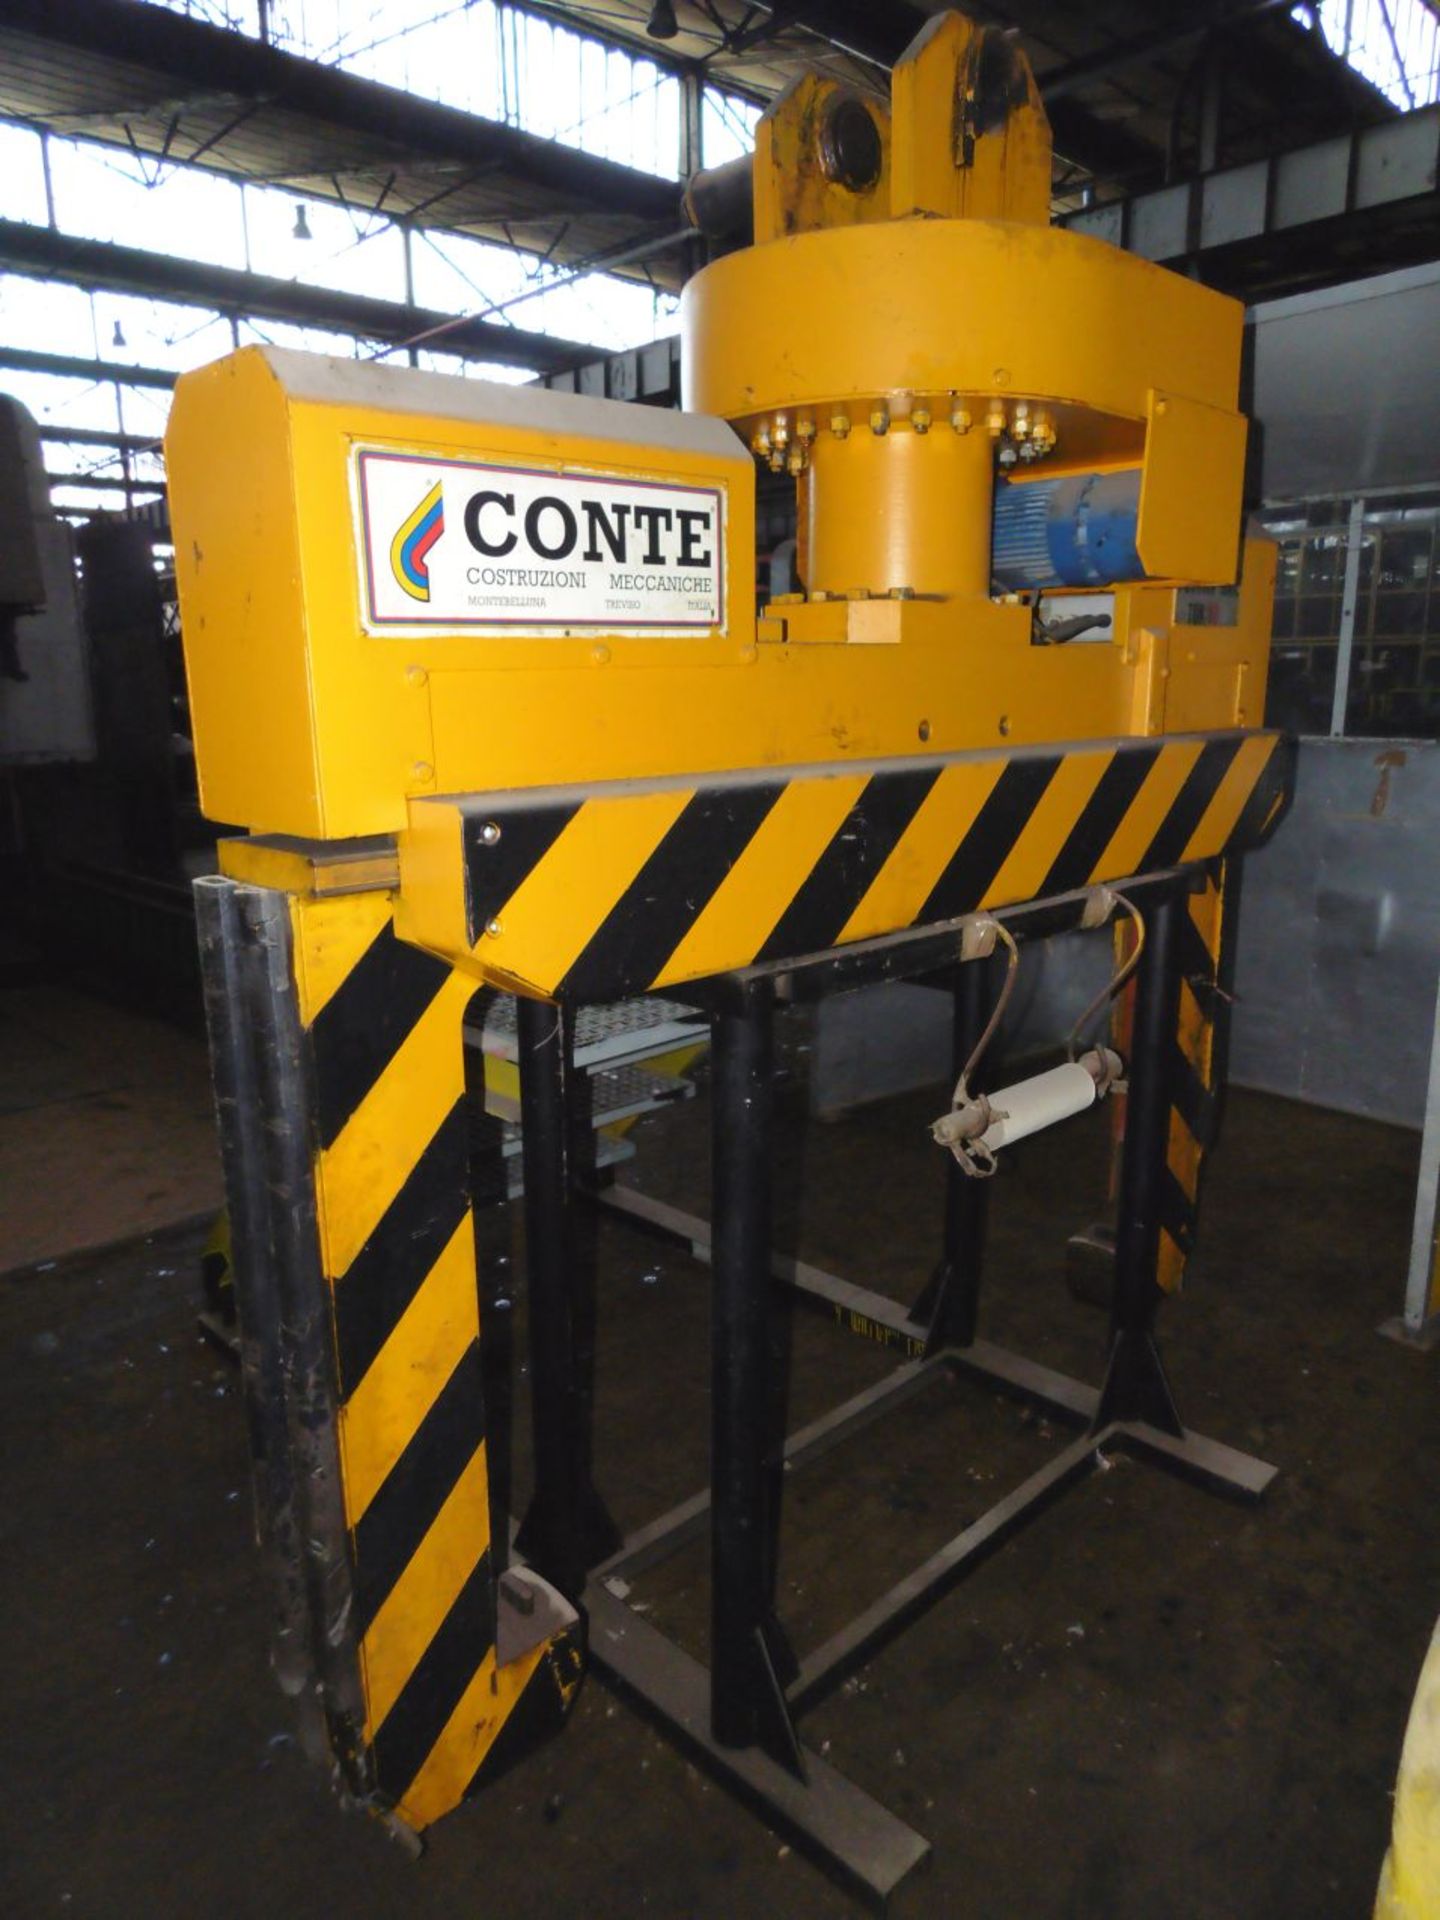 Conte 10 tonnes Hydraulic Coil Lifting C-Clamp.  Max Size 2000mm; Min Size 900mm. C/W Stand.